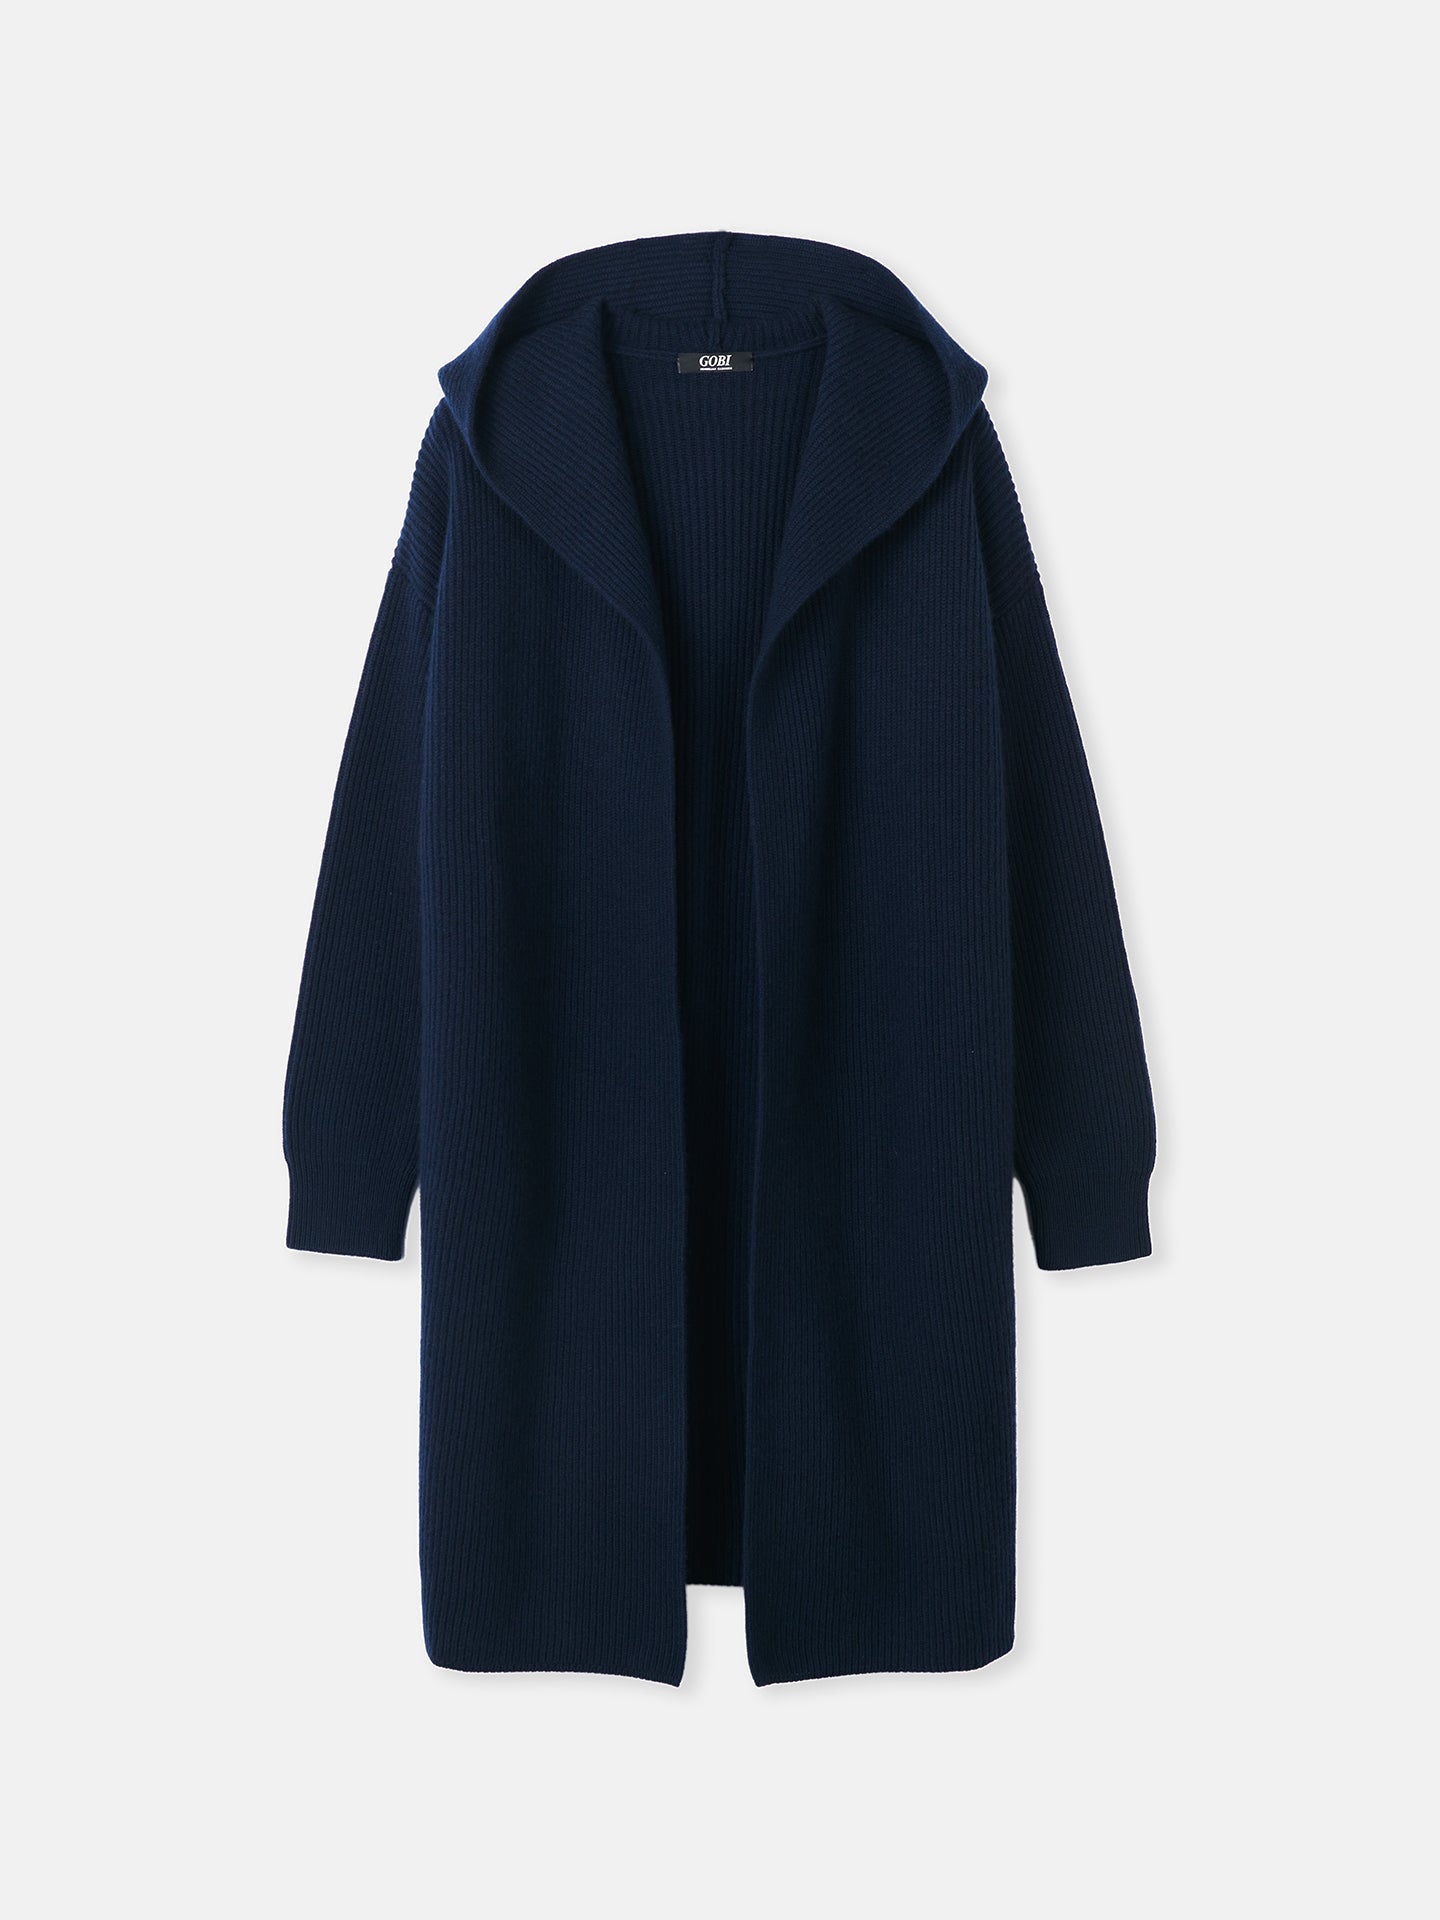 Cashmere Hooded Cardigan Navy - GOBI Cashmere - Sports Casual